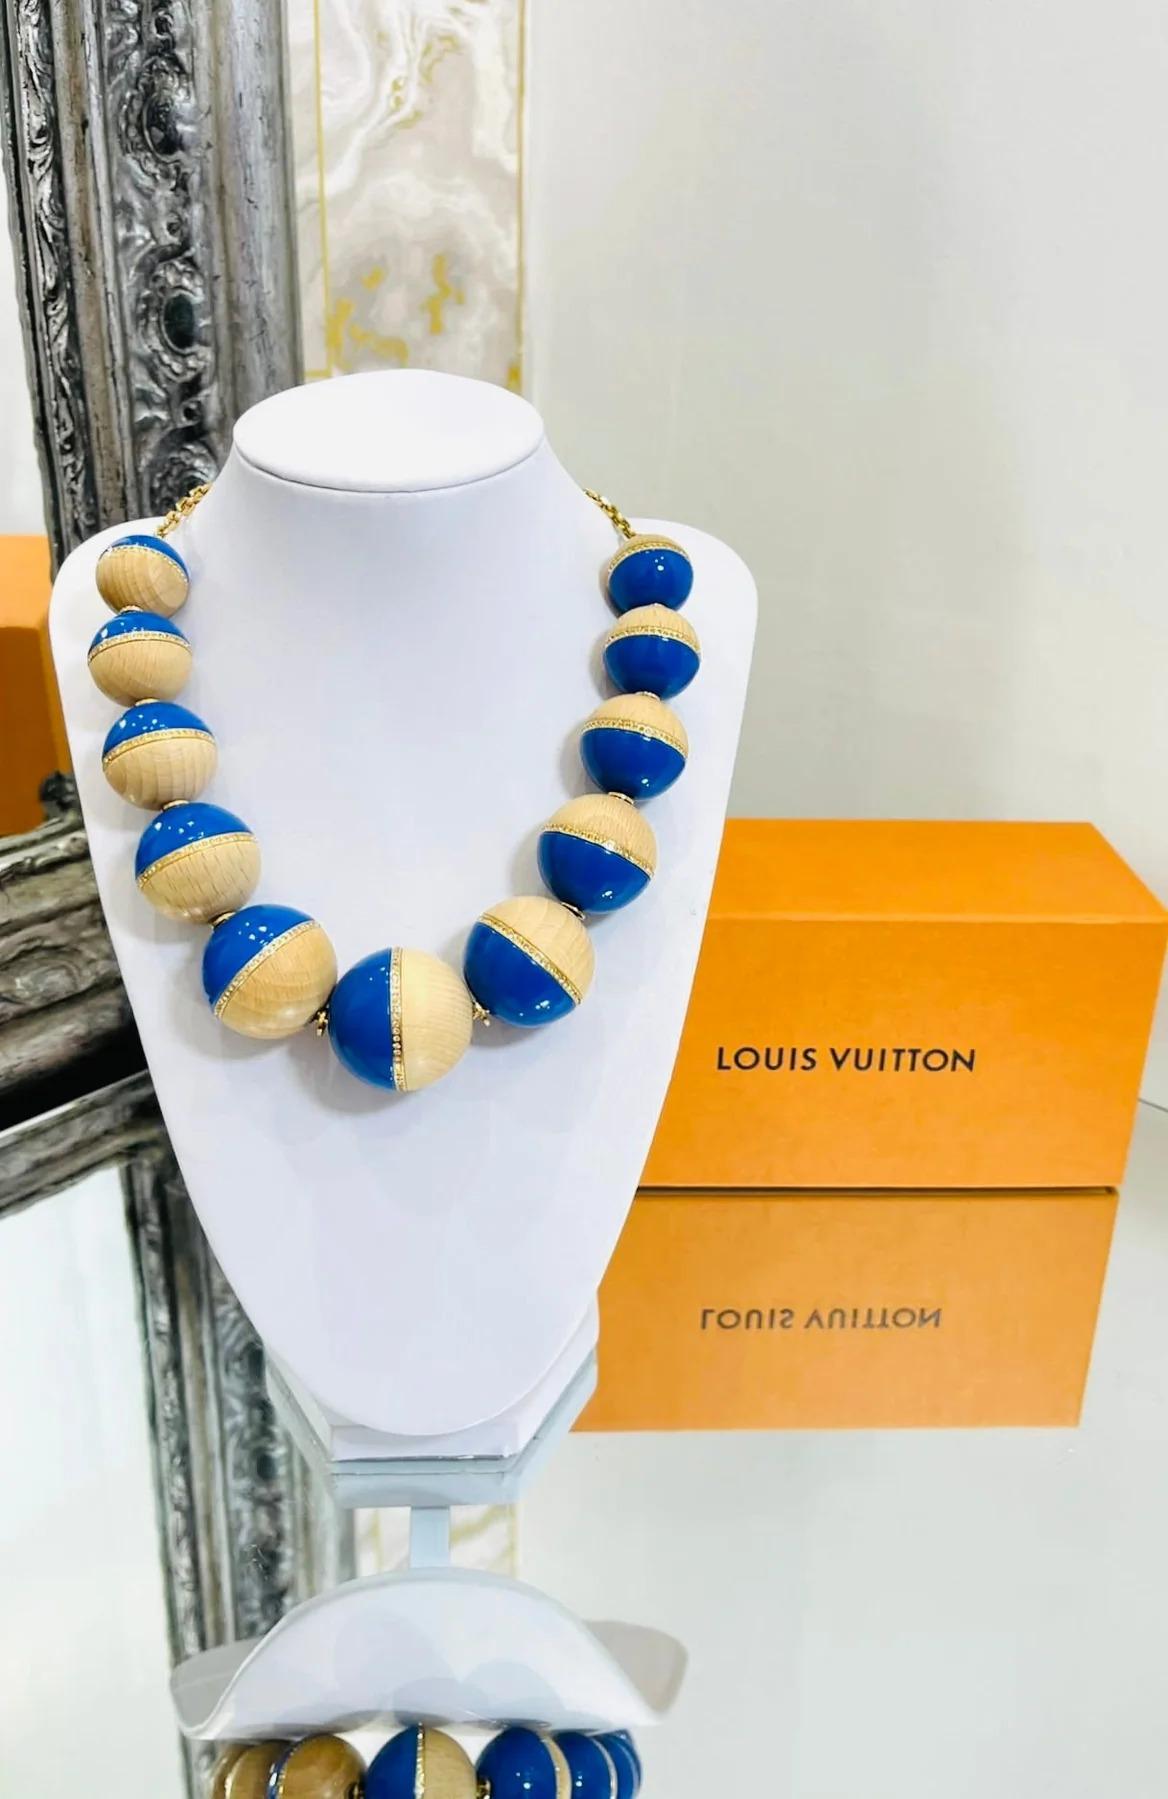 Round Cut Louis Vuitton Crystal, Wood & Resin Beaded Necklace For Sale